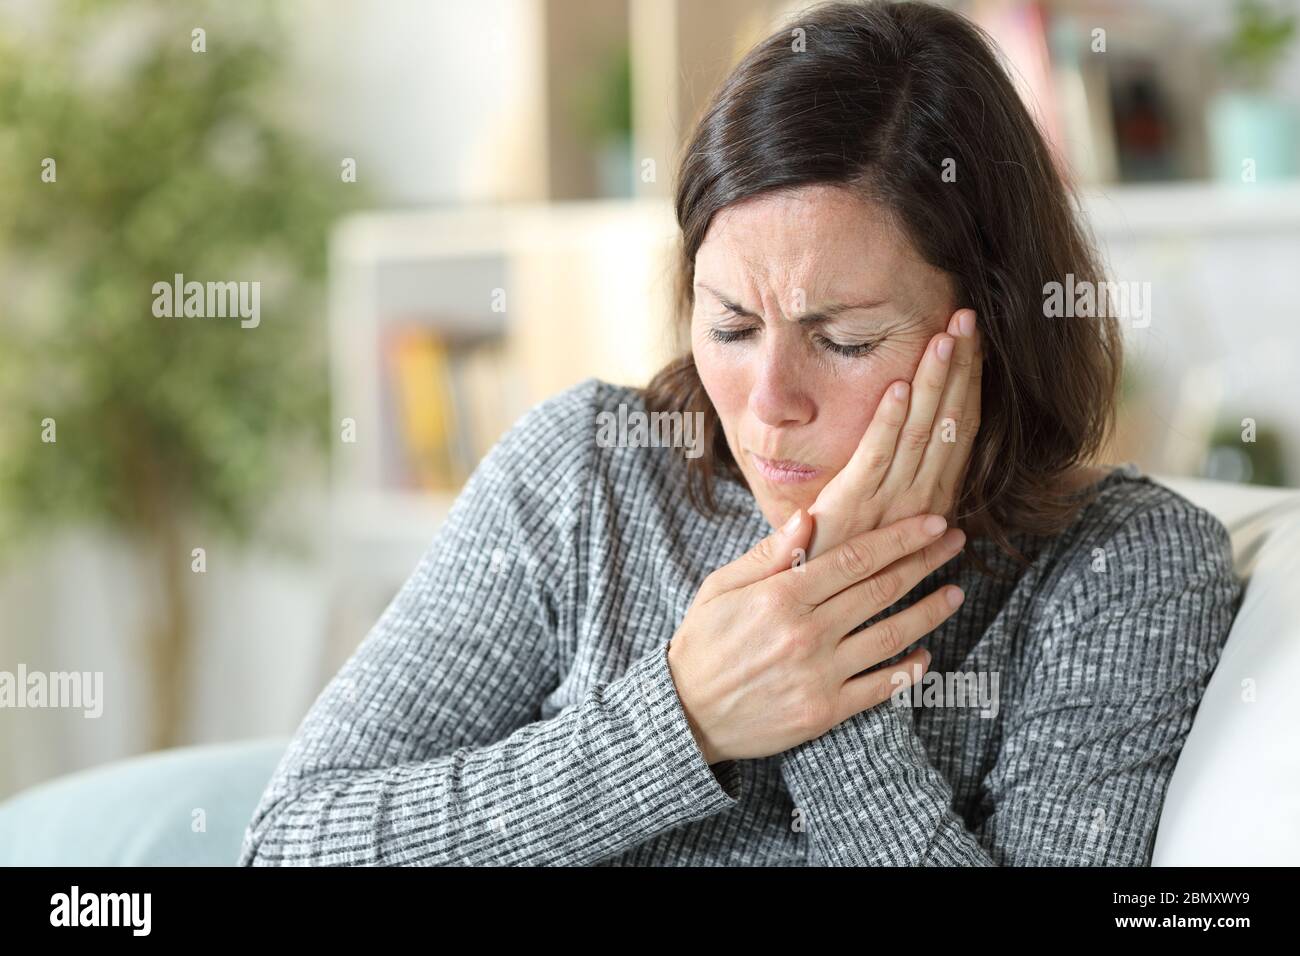 Middle age woman in pain suffering toothache touching face sitting on a couch at home Stock Photo